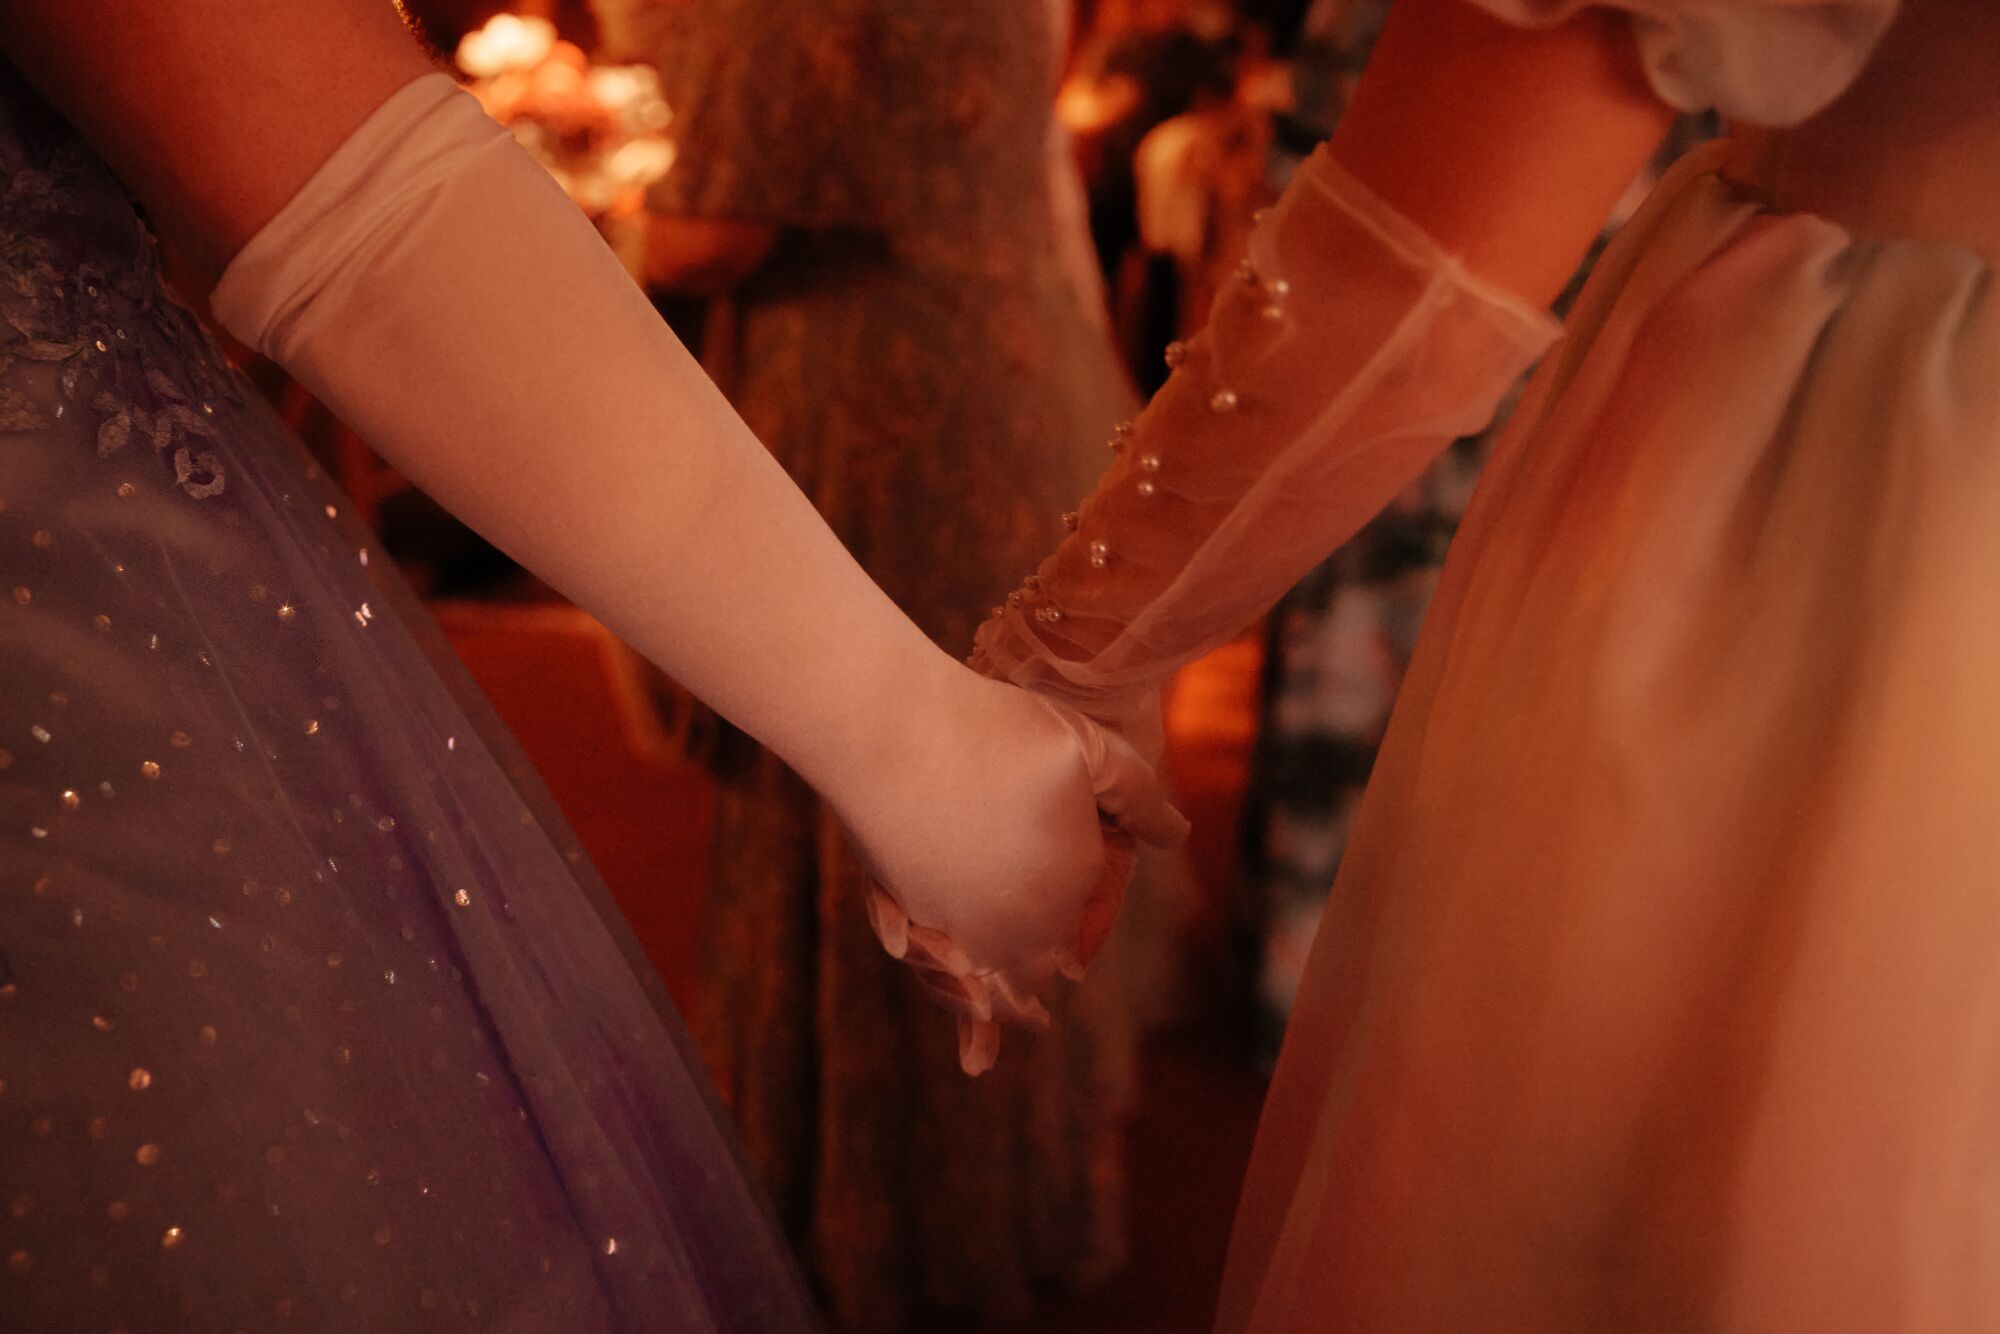 Two women in long gloves hold hands at a dress ball.